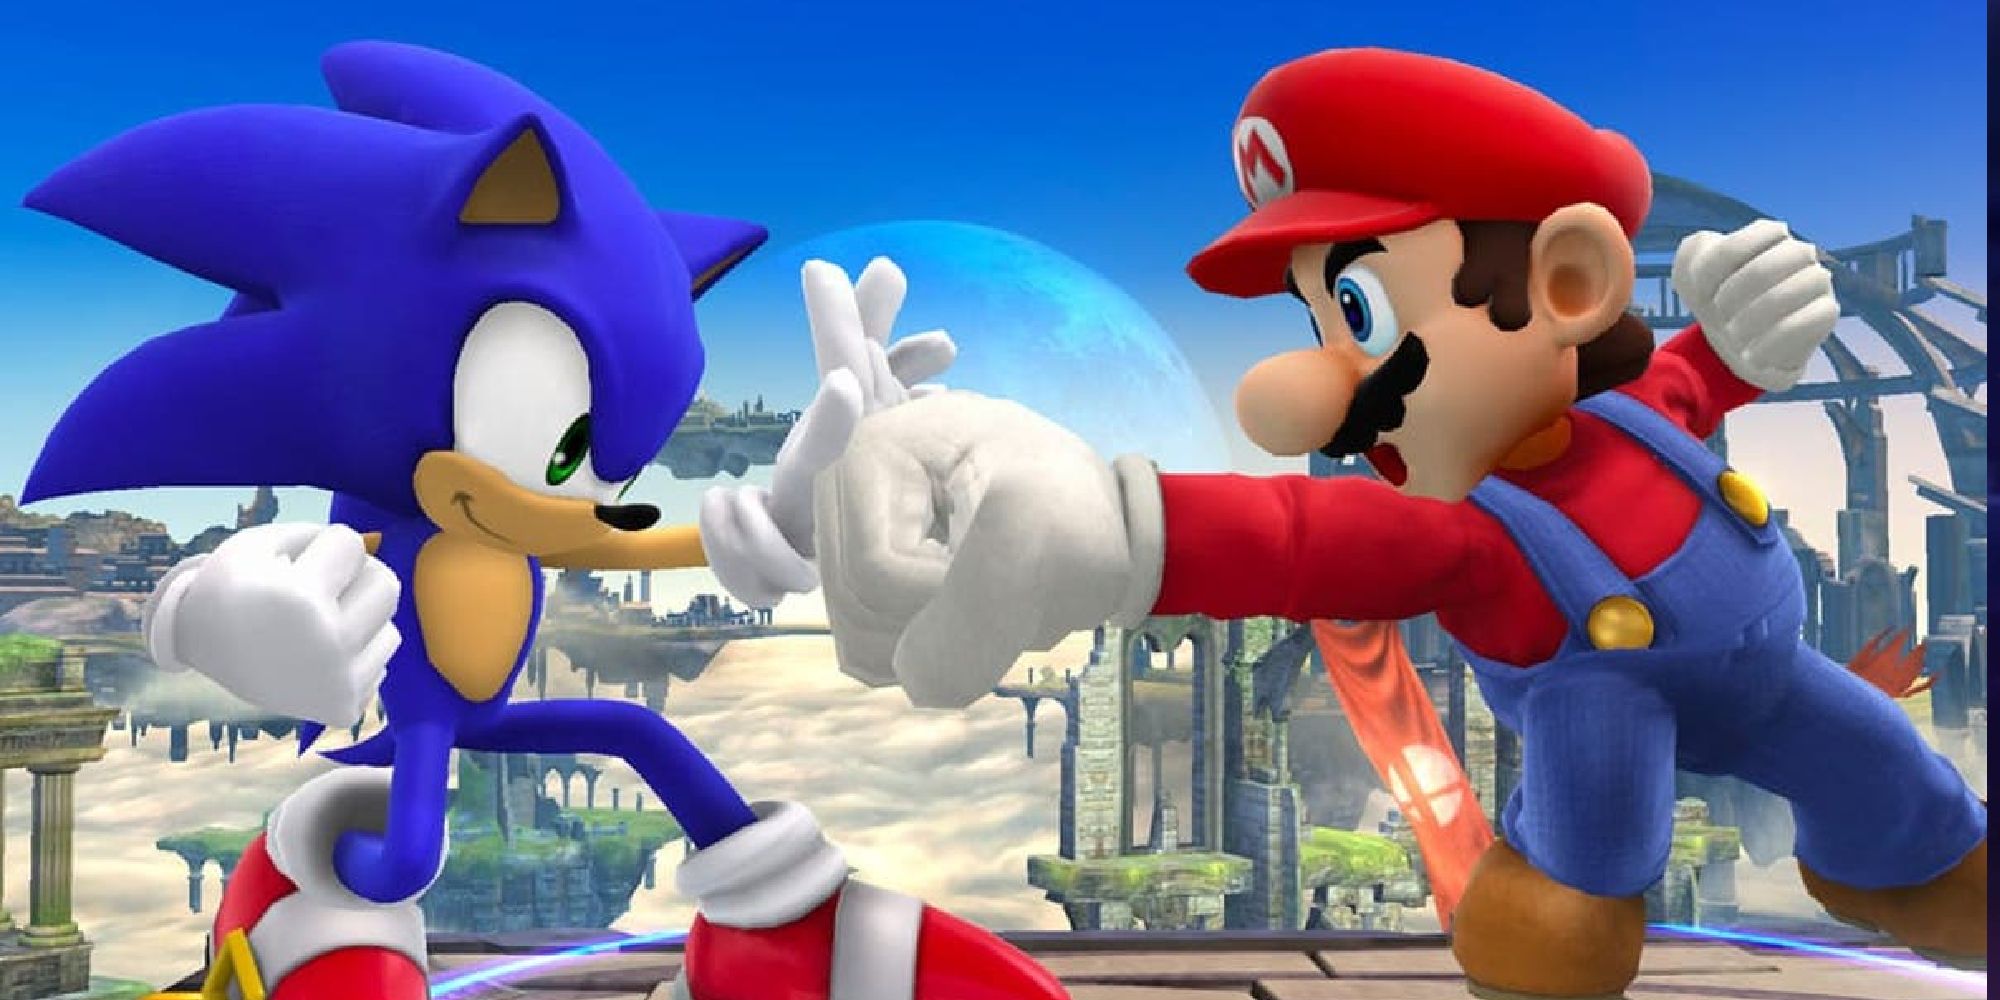 Sonic and Mario fighting on Battlefield in Super Smash Bros Ultimate